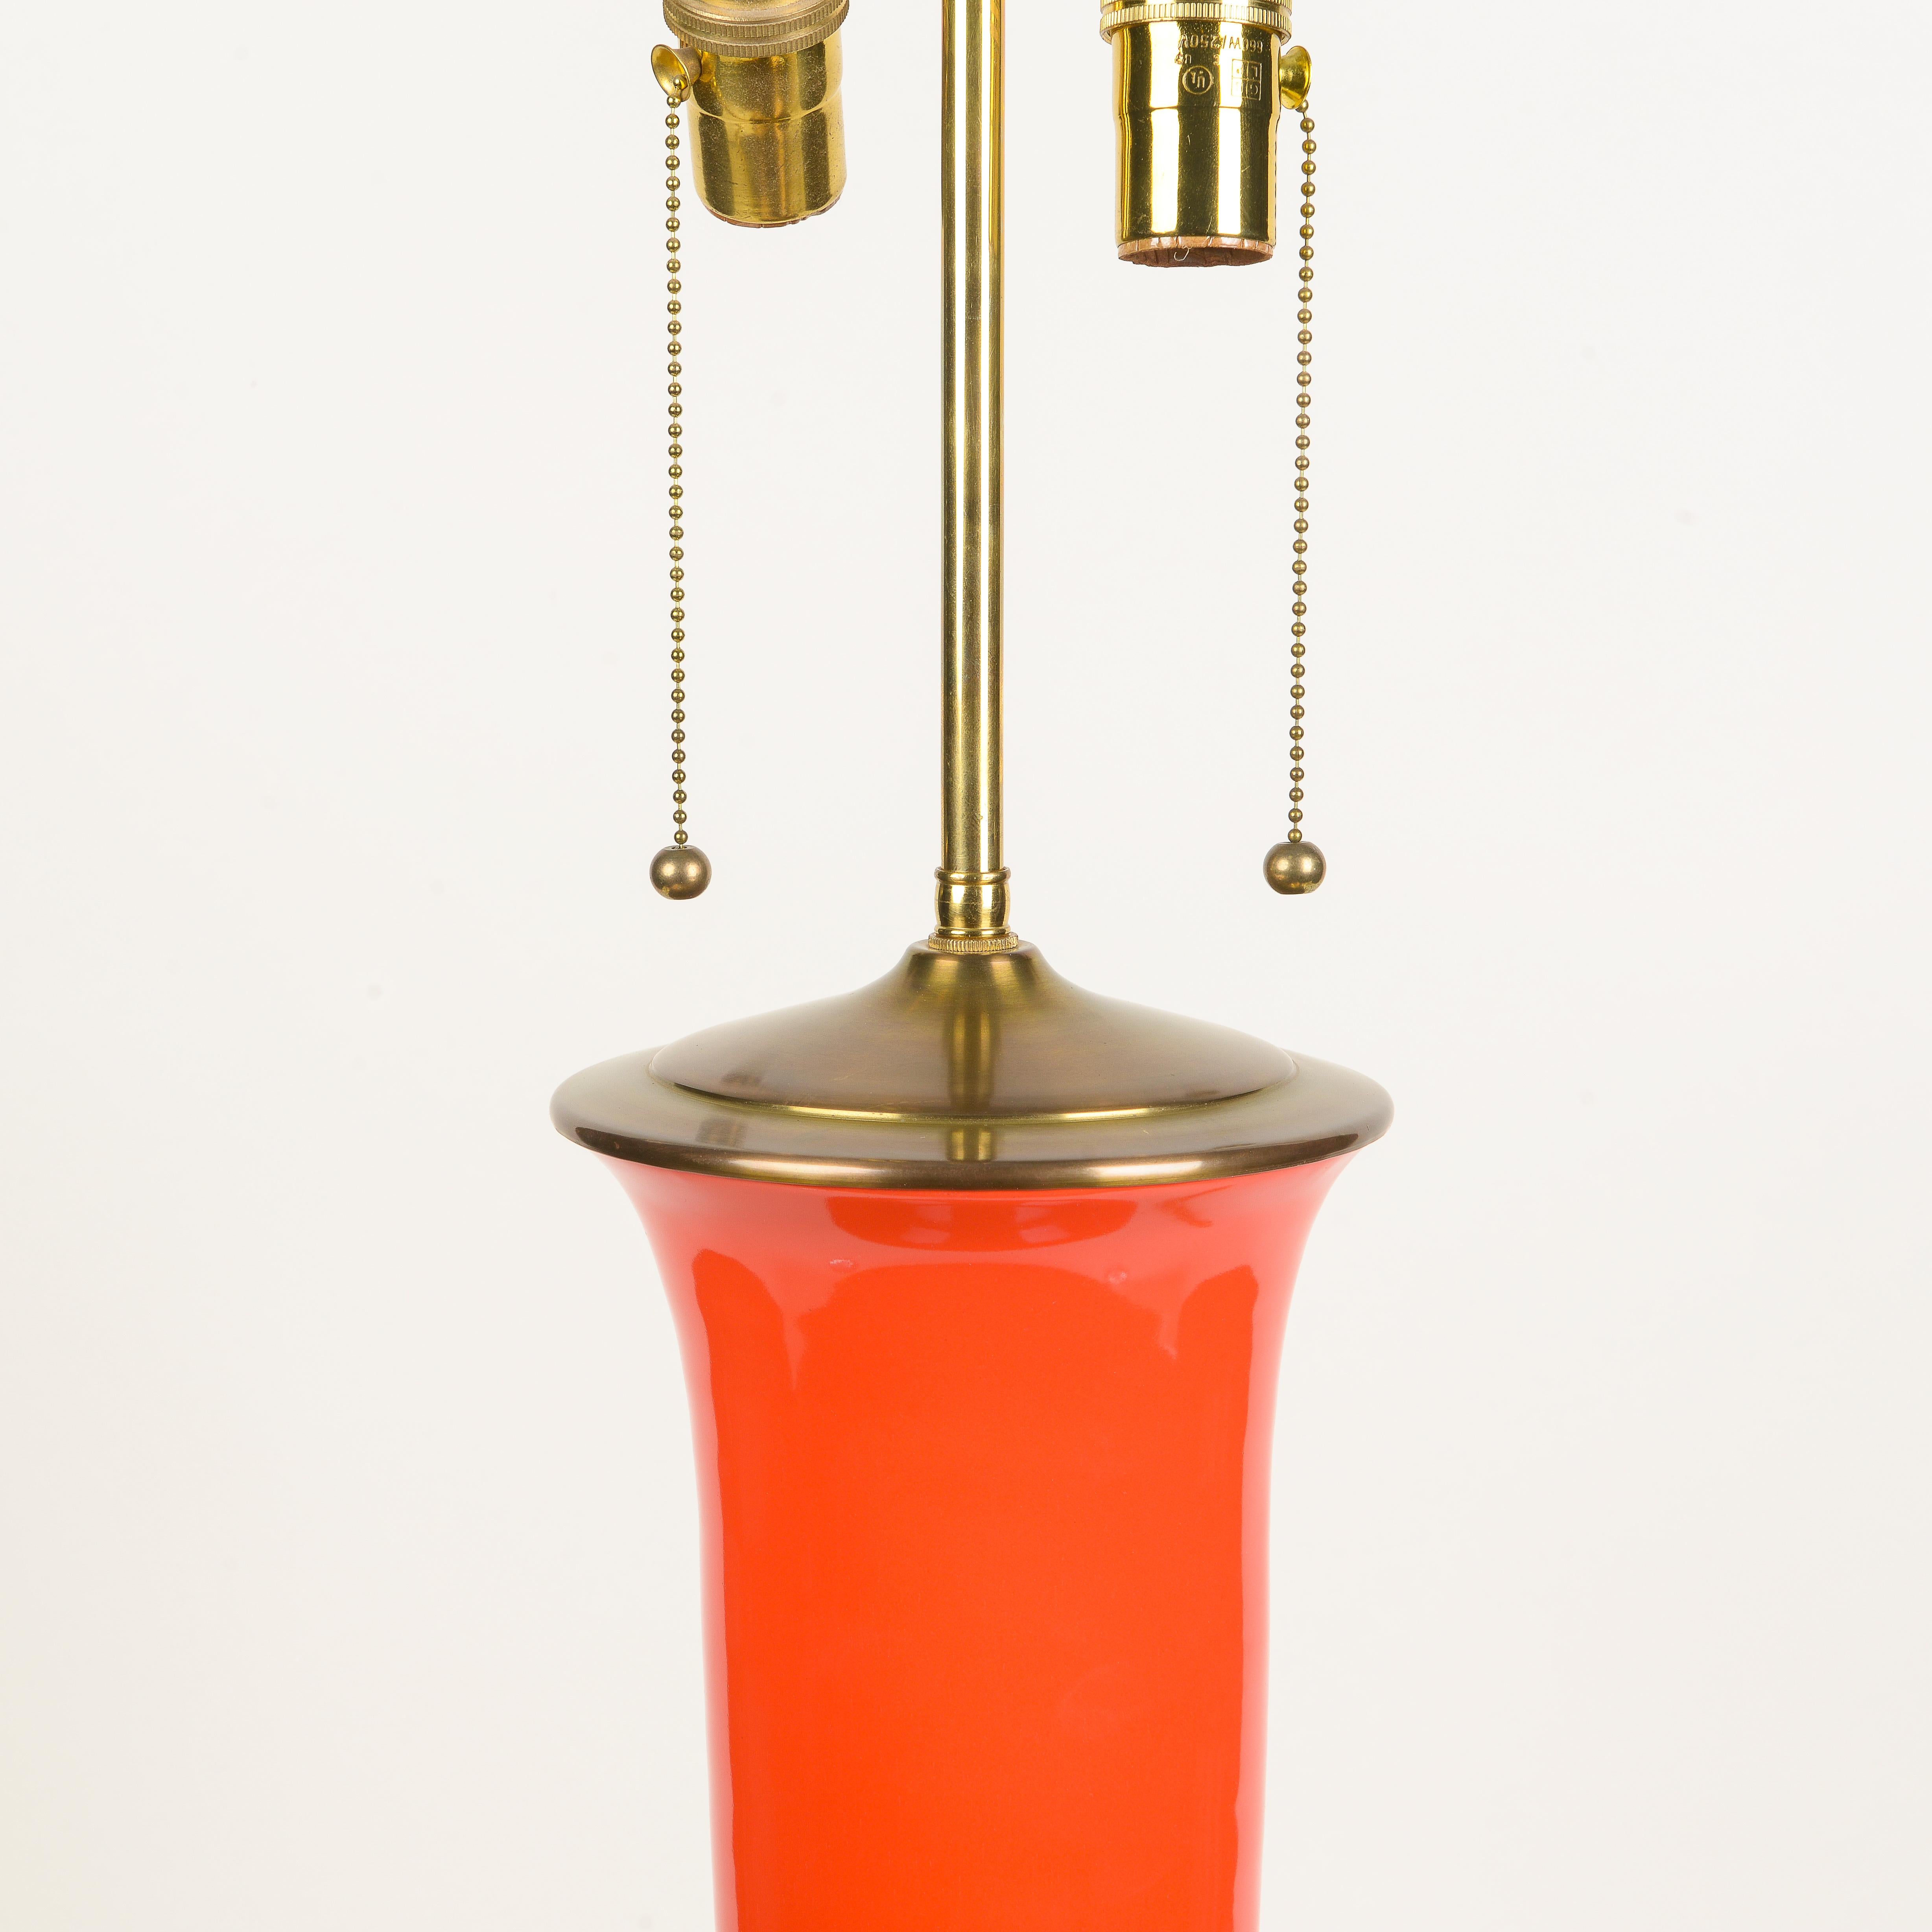 A Pair of Christopher Spitzmiller 'Garniture' Ceramic Lamps in Coral In Excellent Condition For Sale In New York, NY